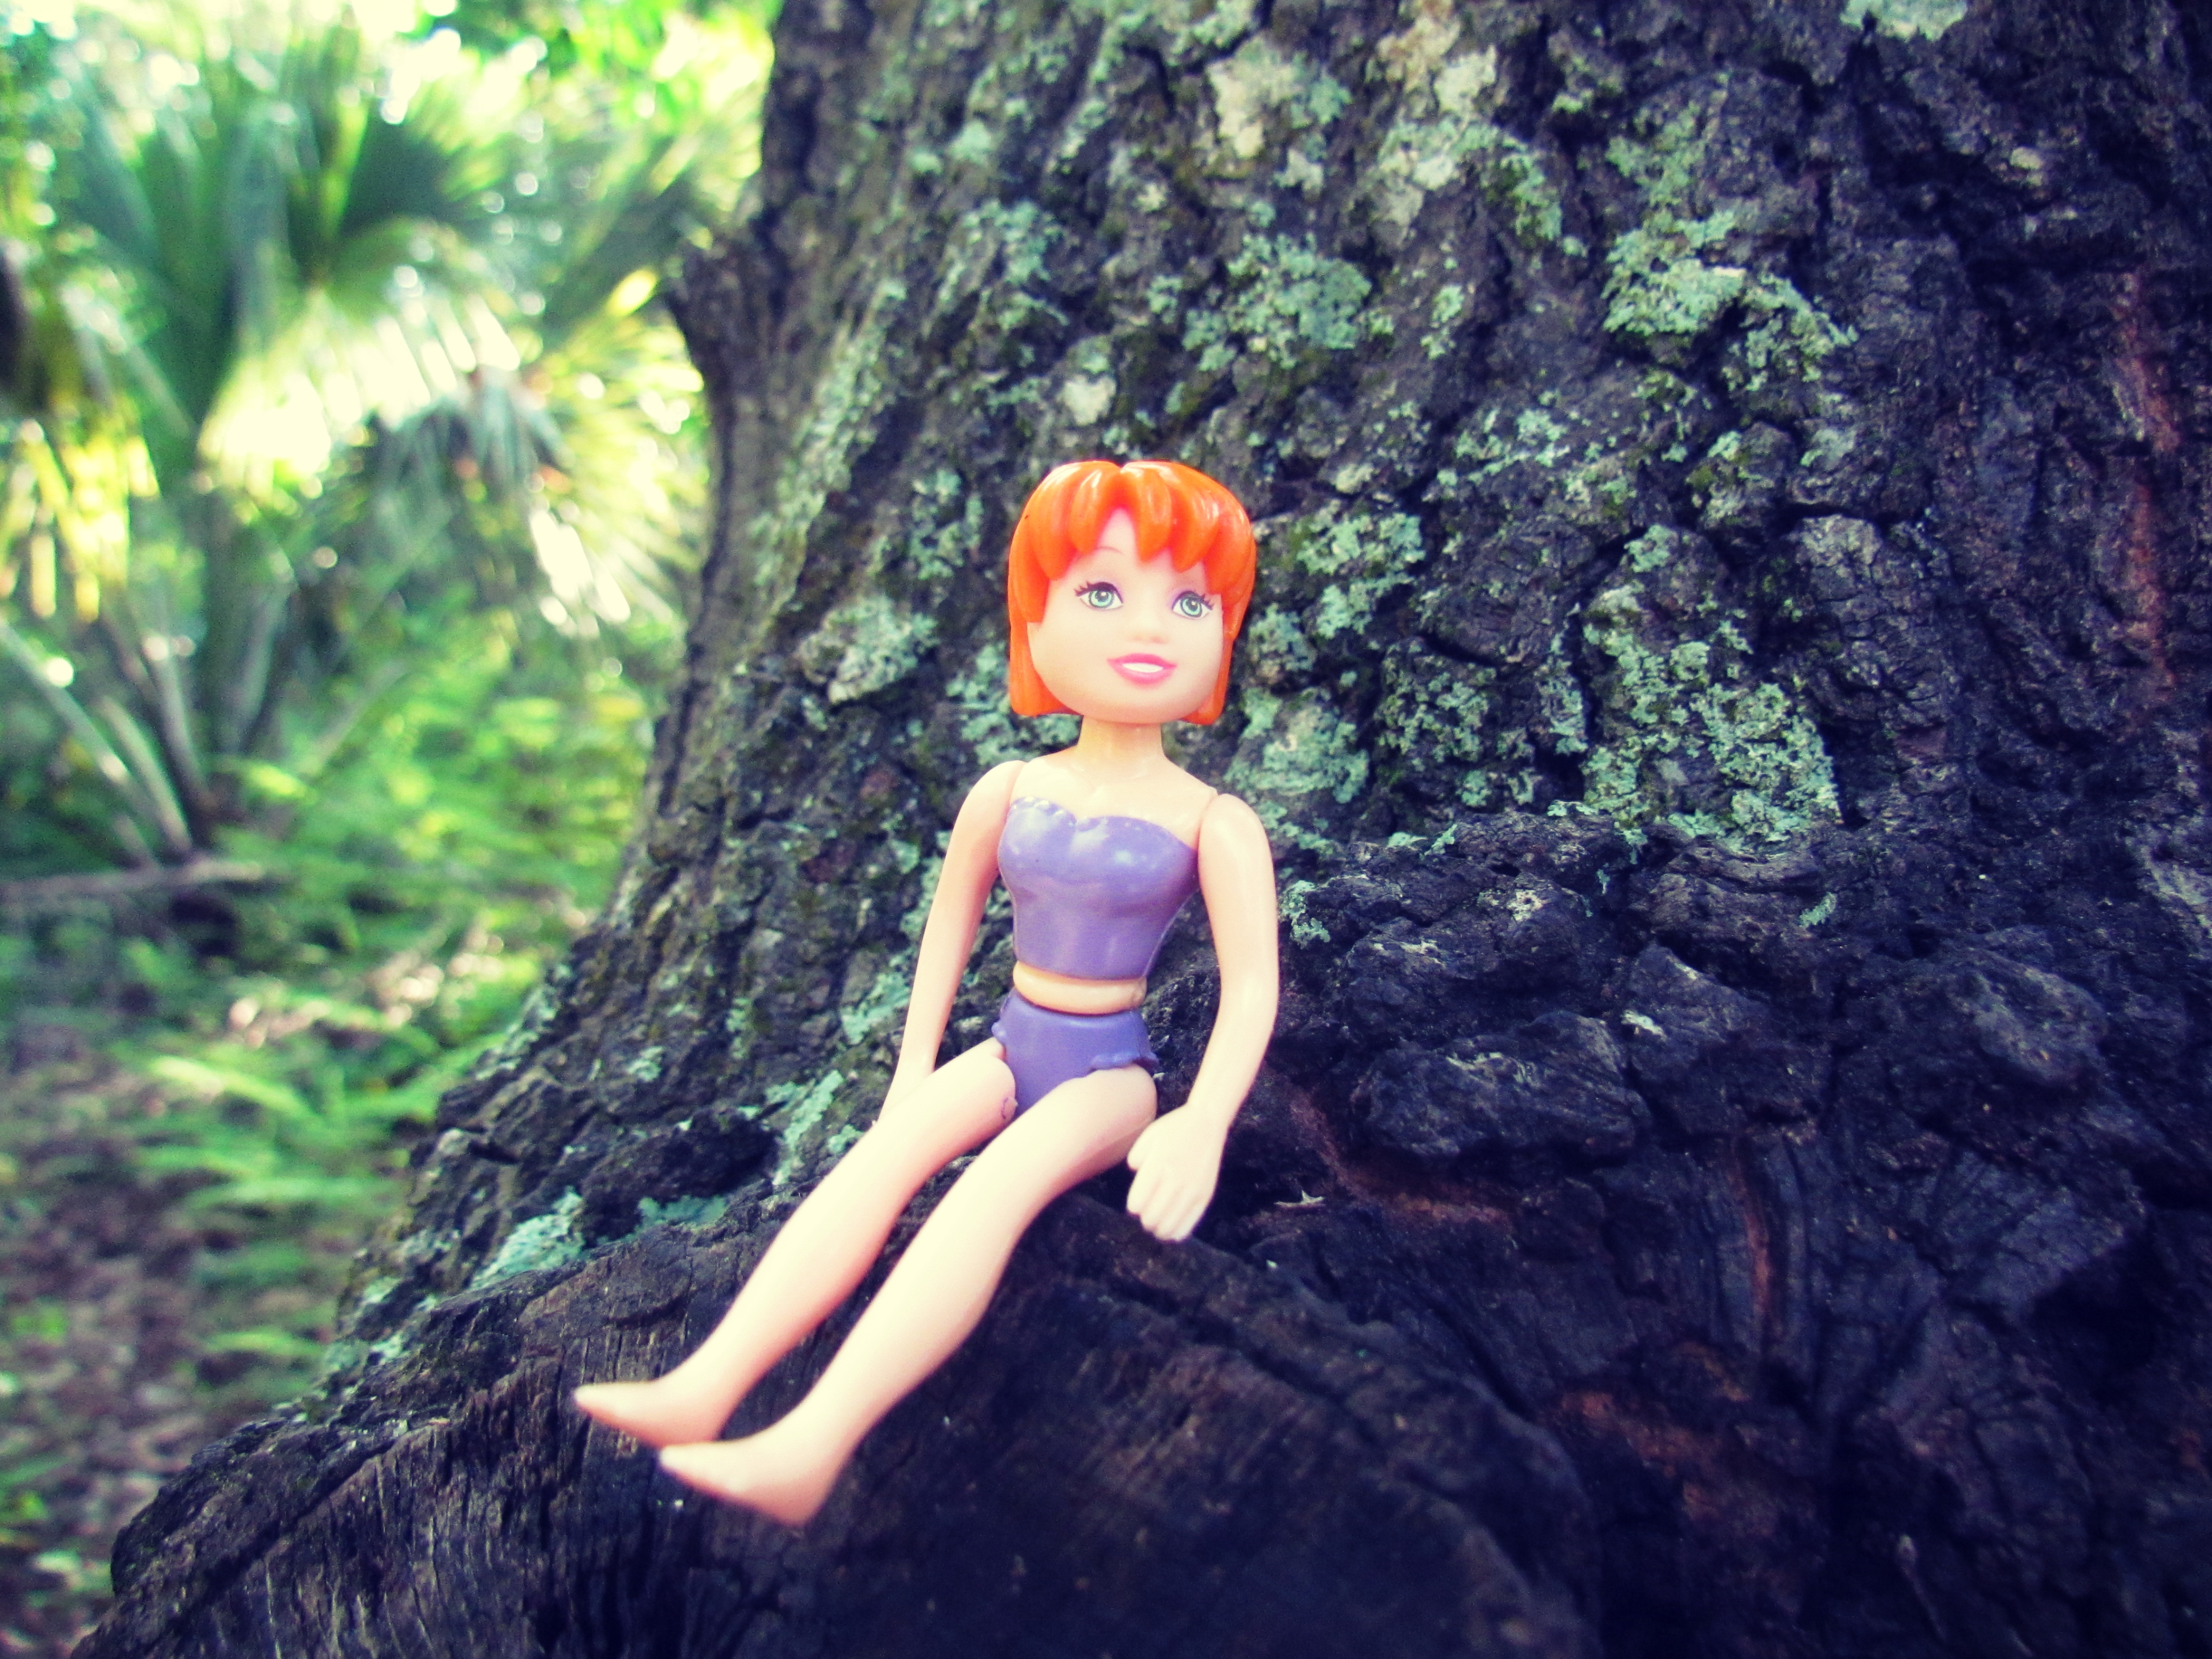 A toy doll figurine found on a tree hollow in nature with minimal clothing and bra and panties set plus red-haired plastic doll, girls novelty toys, kids toys,